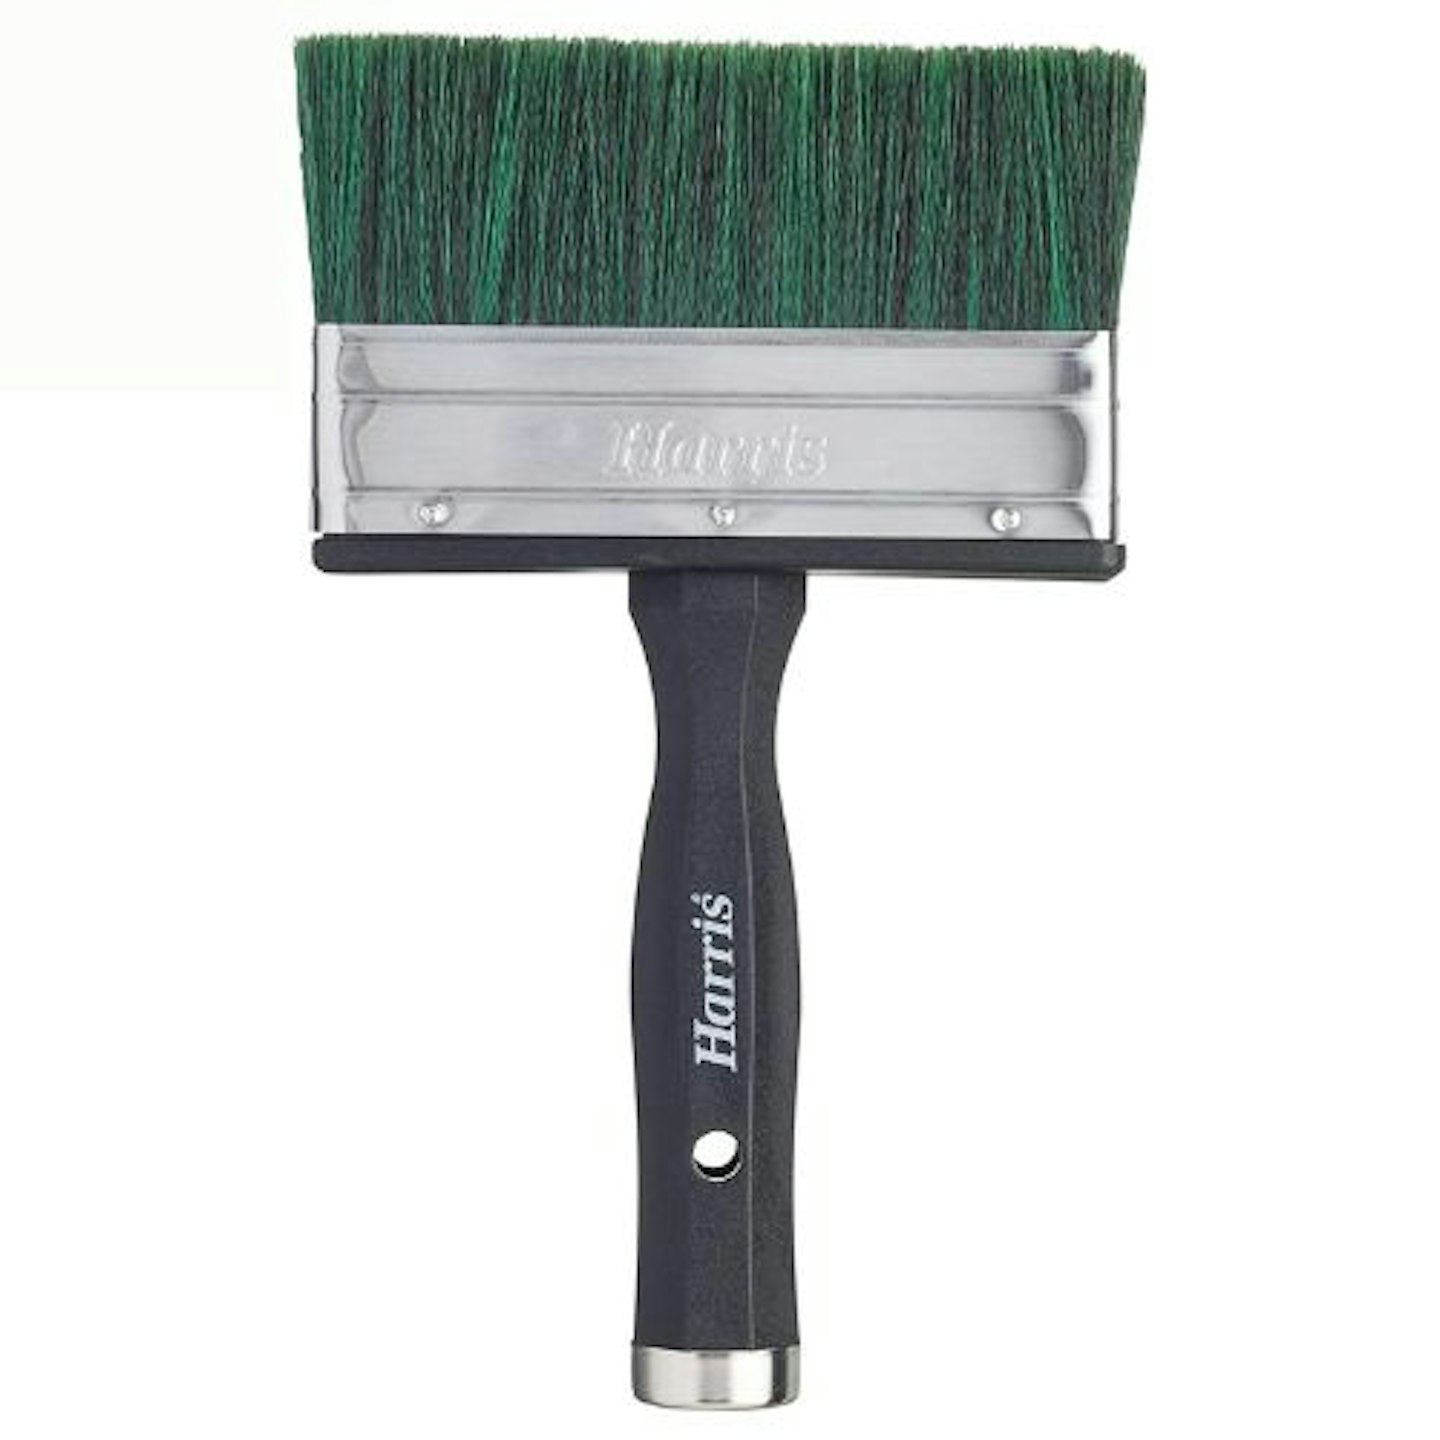 Harris, 5-Inch Seriously Good Shed & Fence Brush